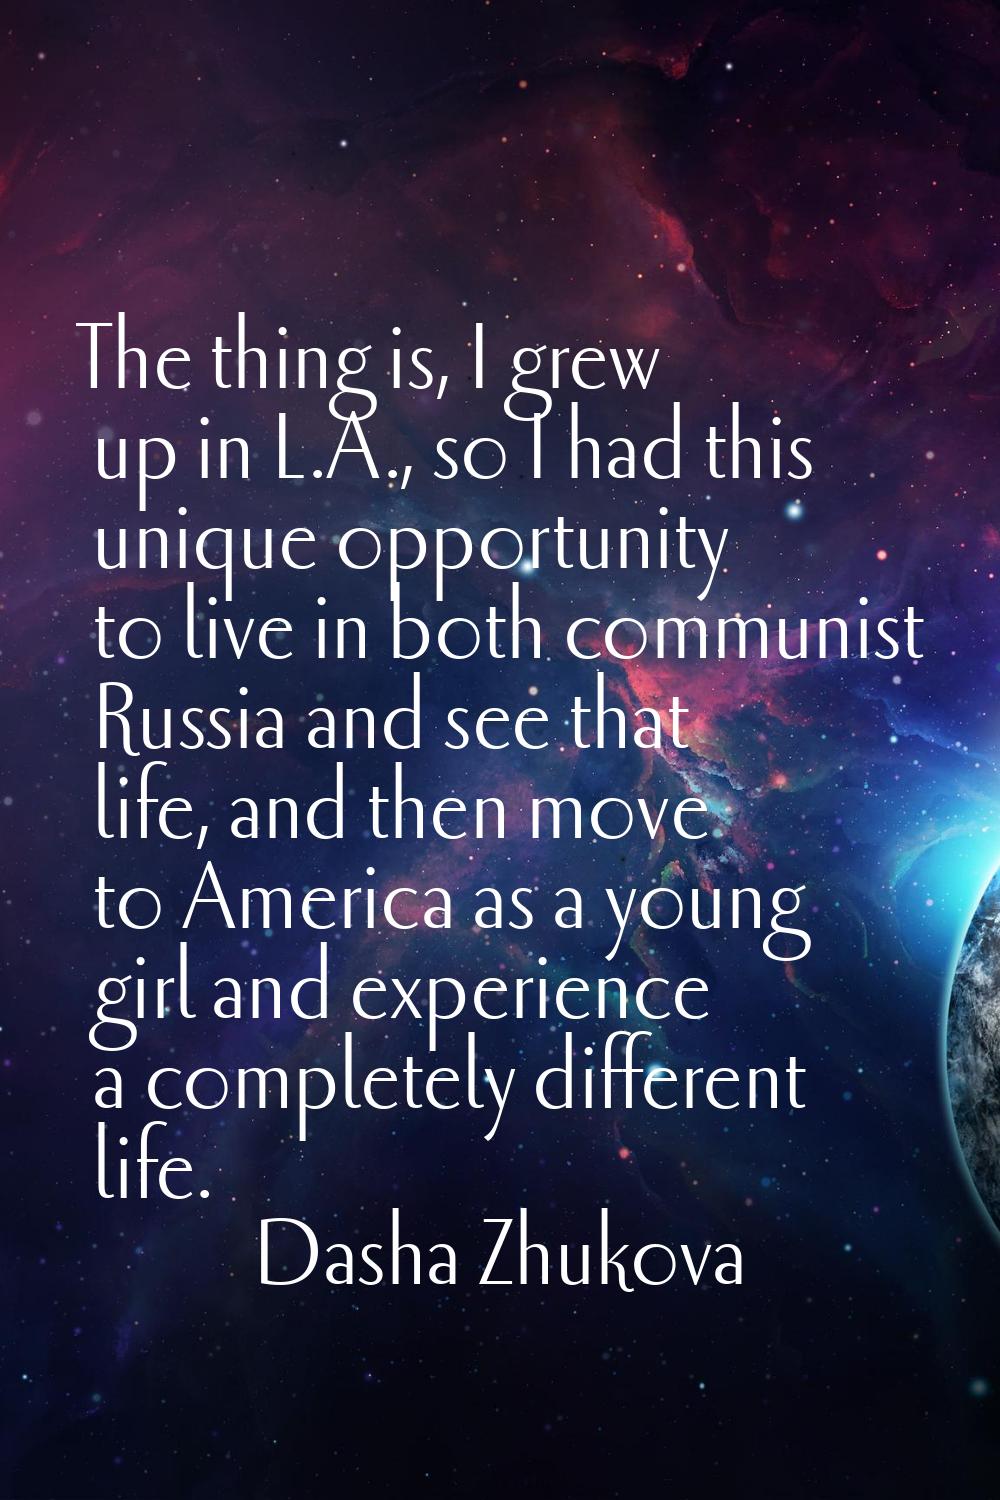 The thing is, I grew up in L.A., so I had this unique opportunity to live in both communist Russia 